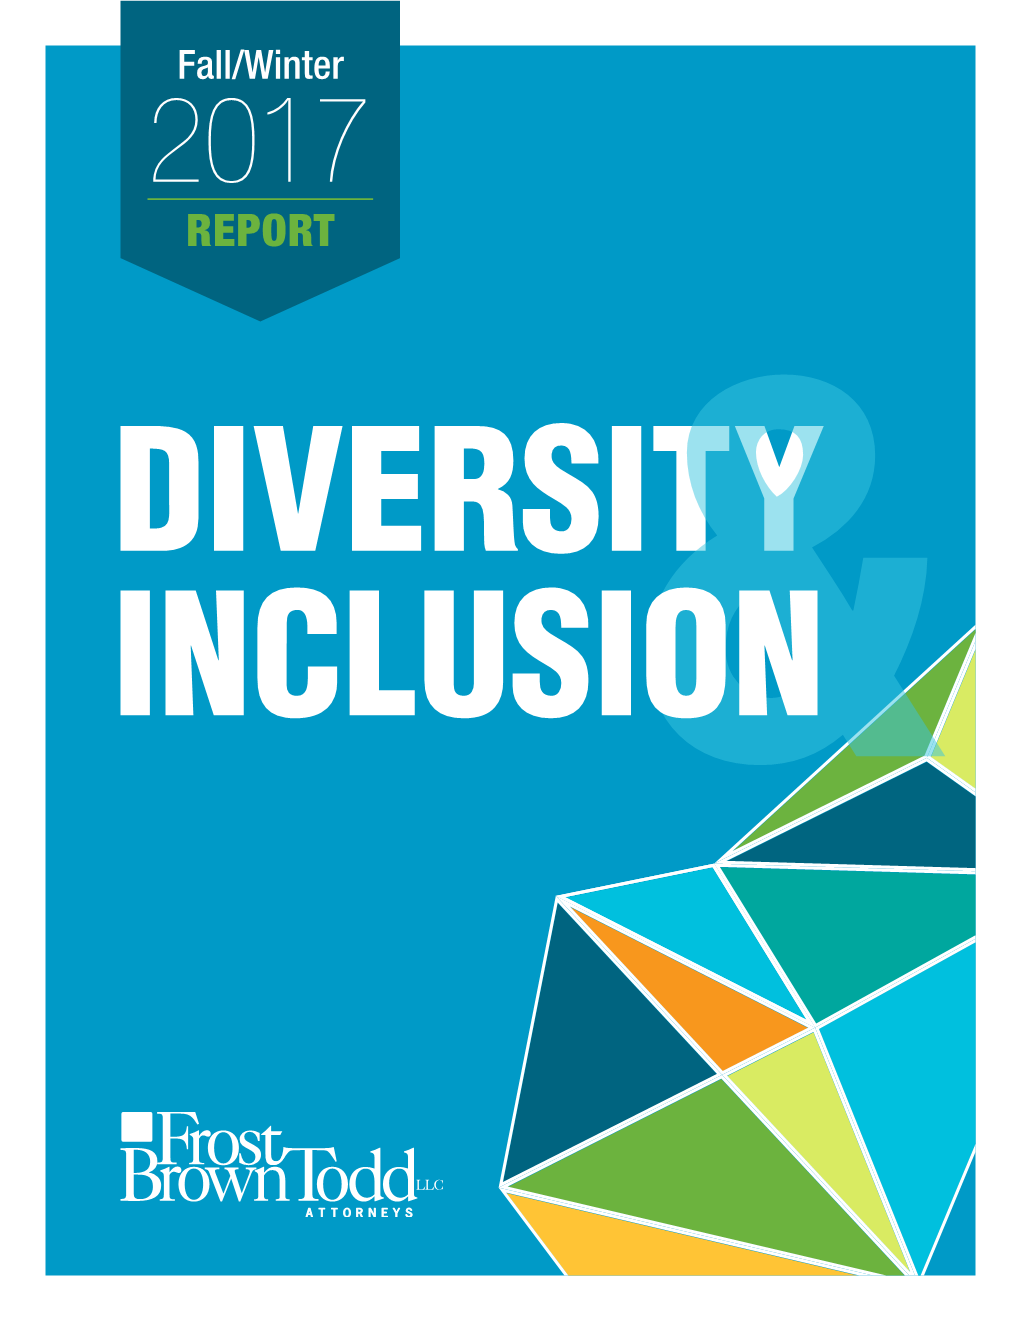 REPORT As a Member of FBT’S Business Professionals Team for the Past 34 Years, I Am Honored to Introduce the Fall Edition of Our Diversity & Inclusion Report